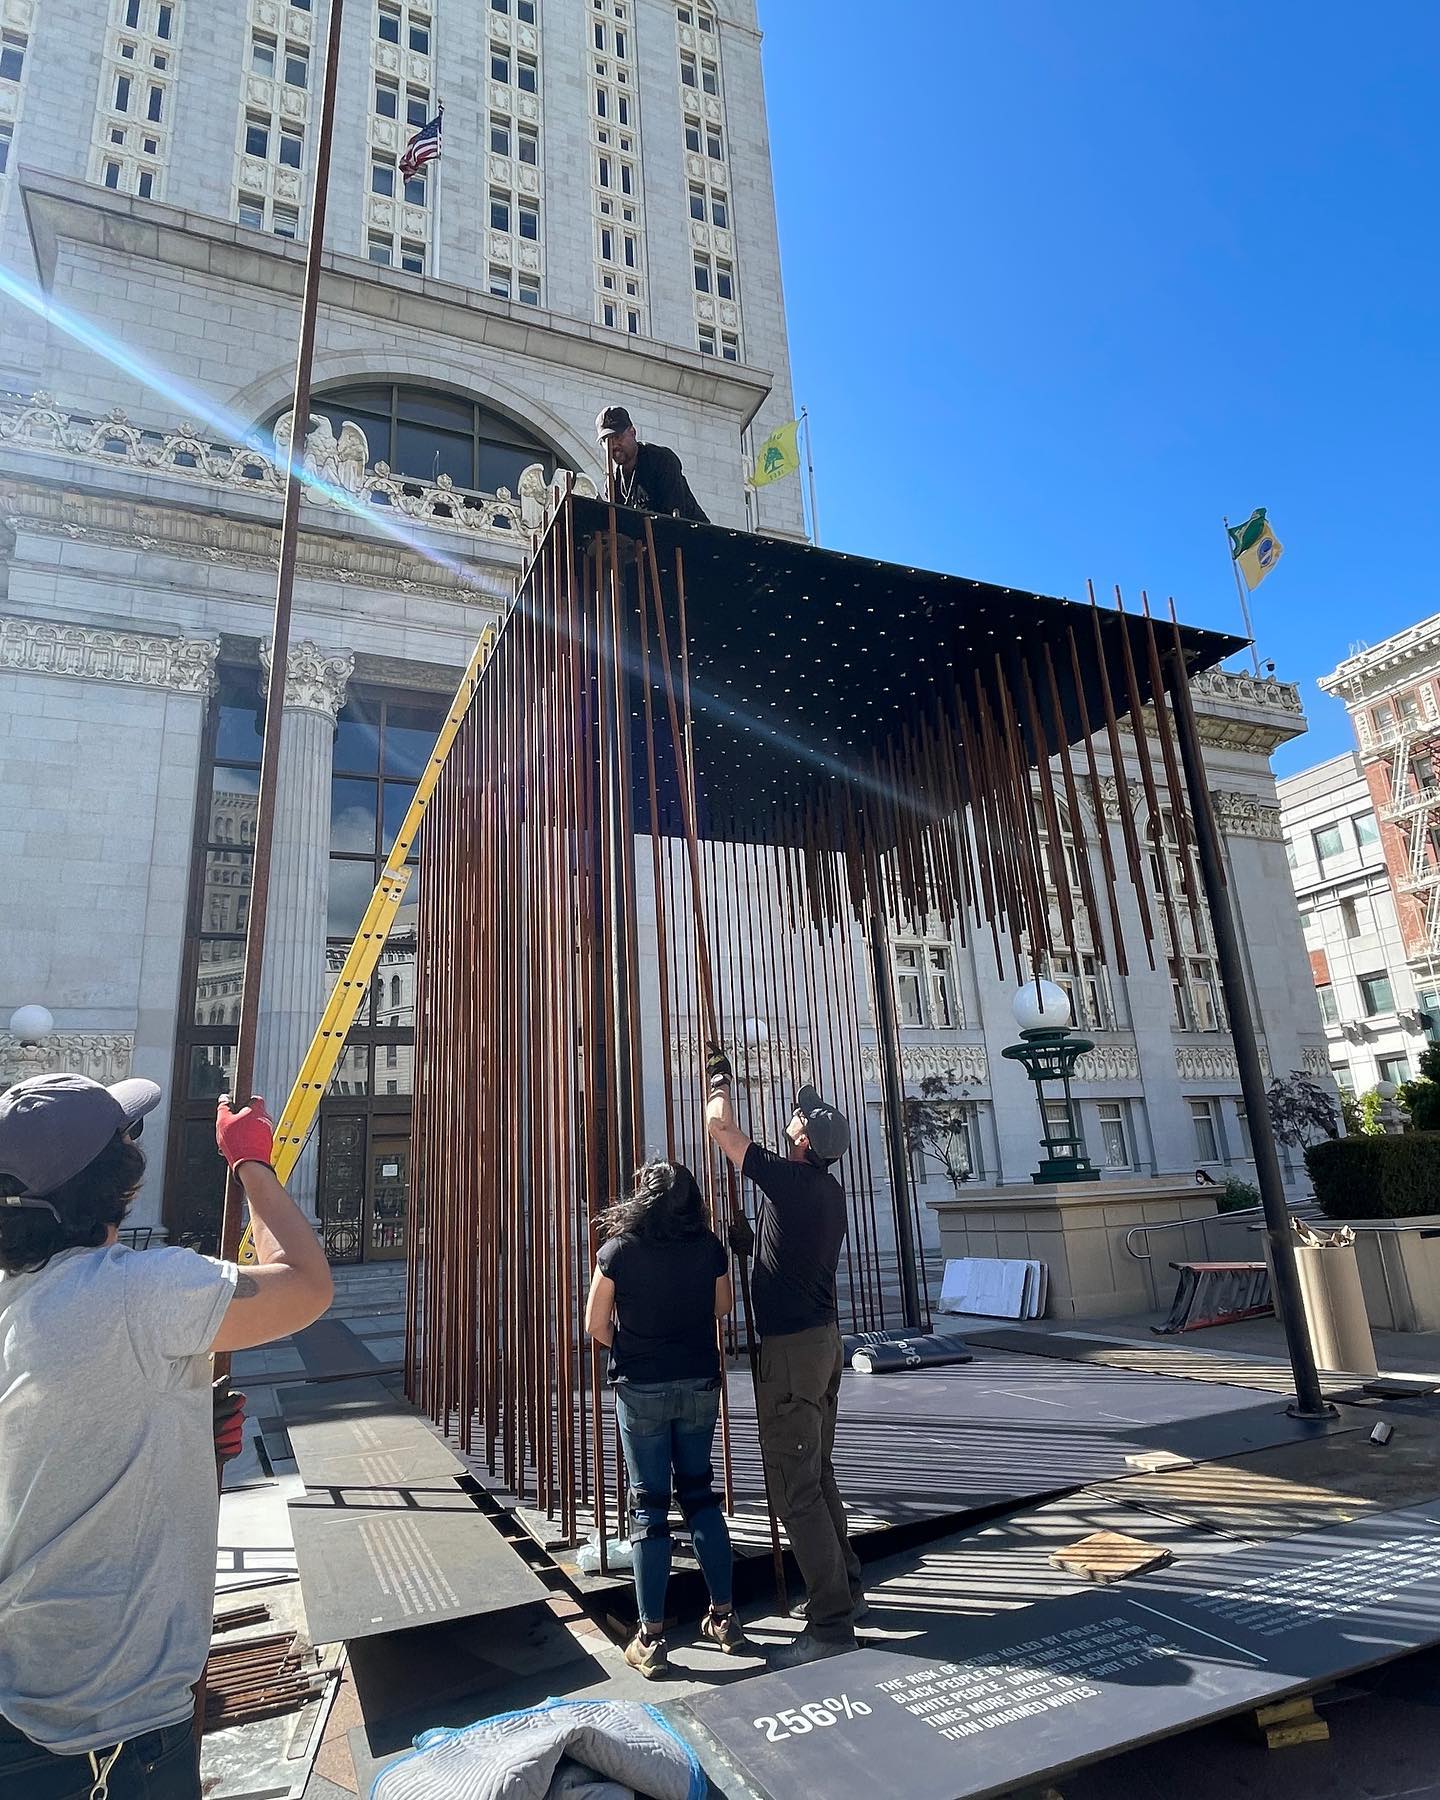 Support Oakland Artists Executive Director Randolph Belle atop the installation called ‘Society’s Cage’ as it was being assembled. Photo courtesy of Facebook.